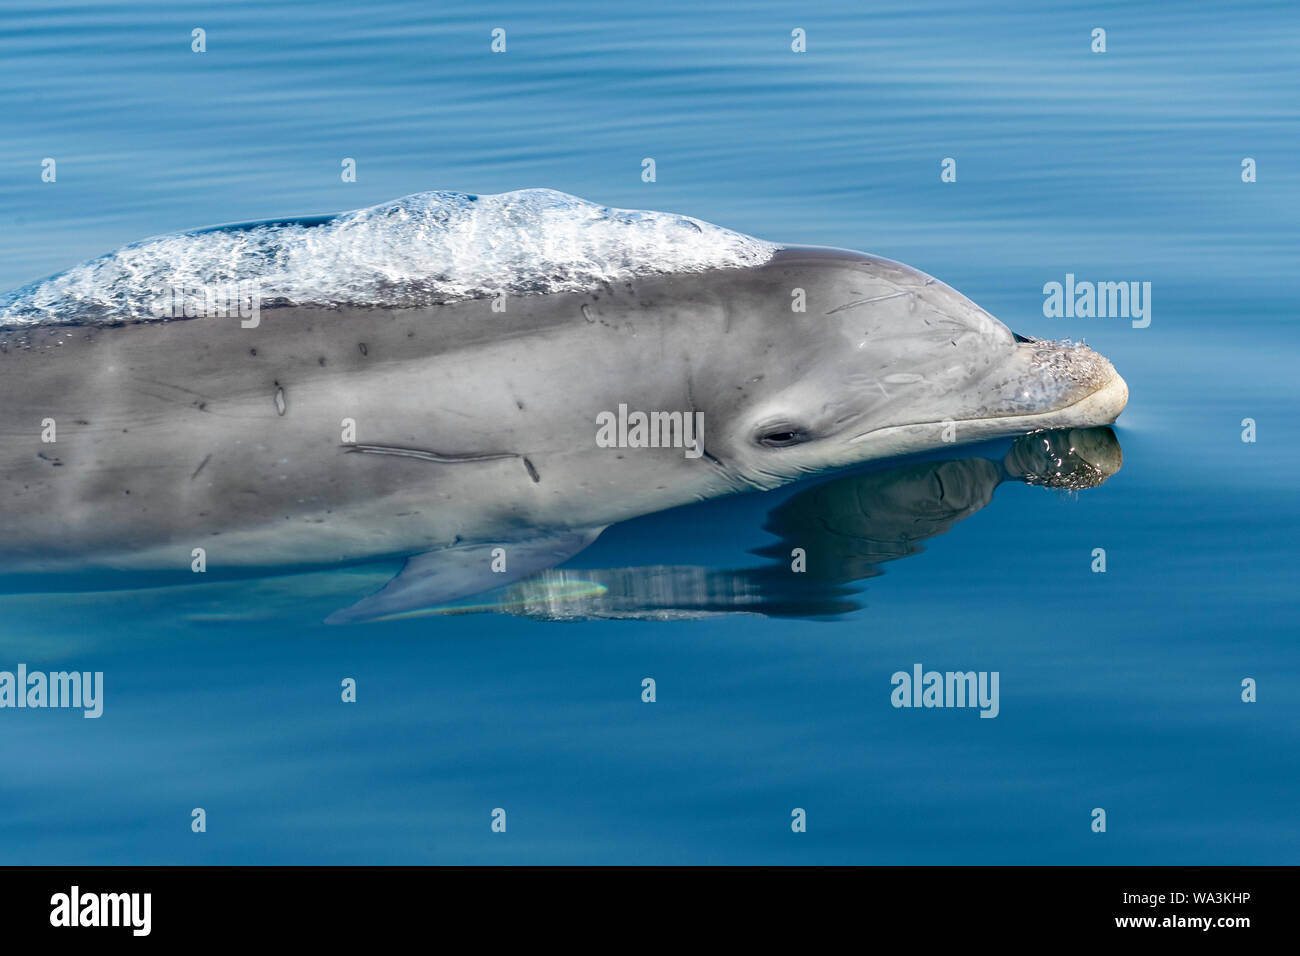 A year old Bottlenose dolphin baby surfaces to breathe, Moray Firth, Scotland. Stock Photo